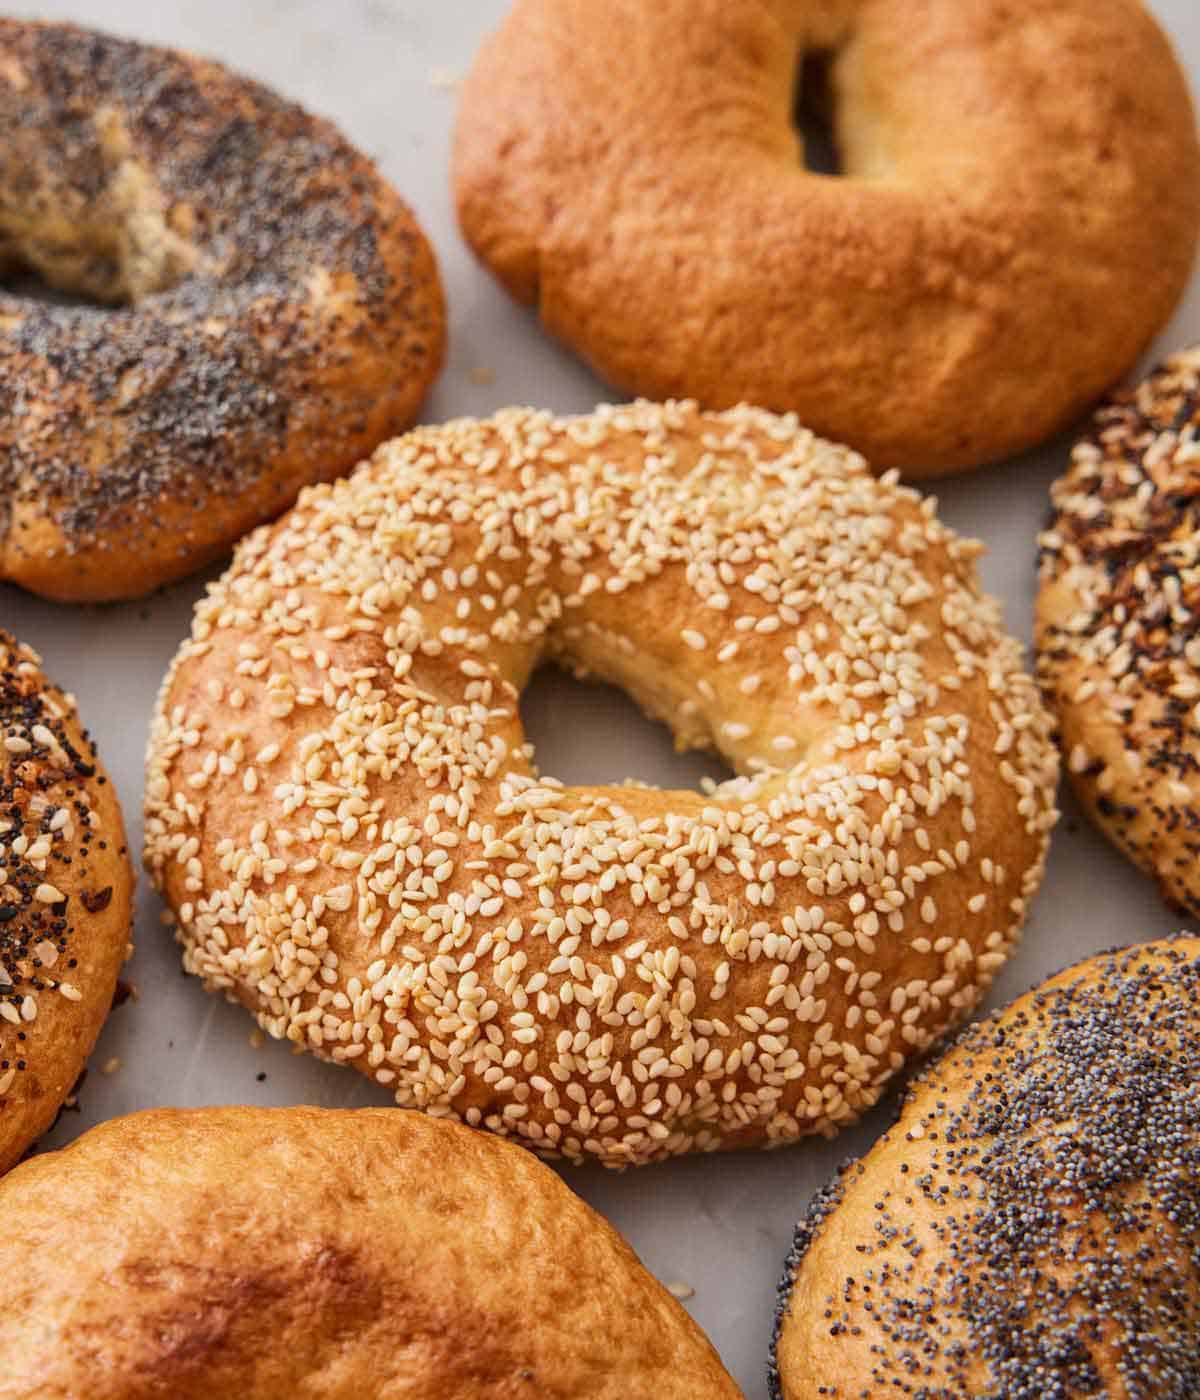 A bagel with sesame seeds surrounded by additional bagels with different toppings.